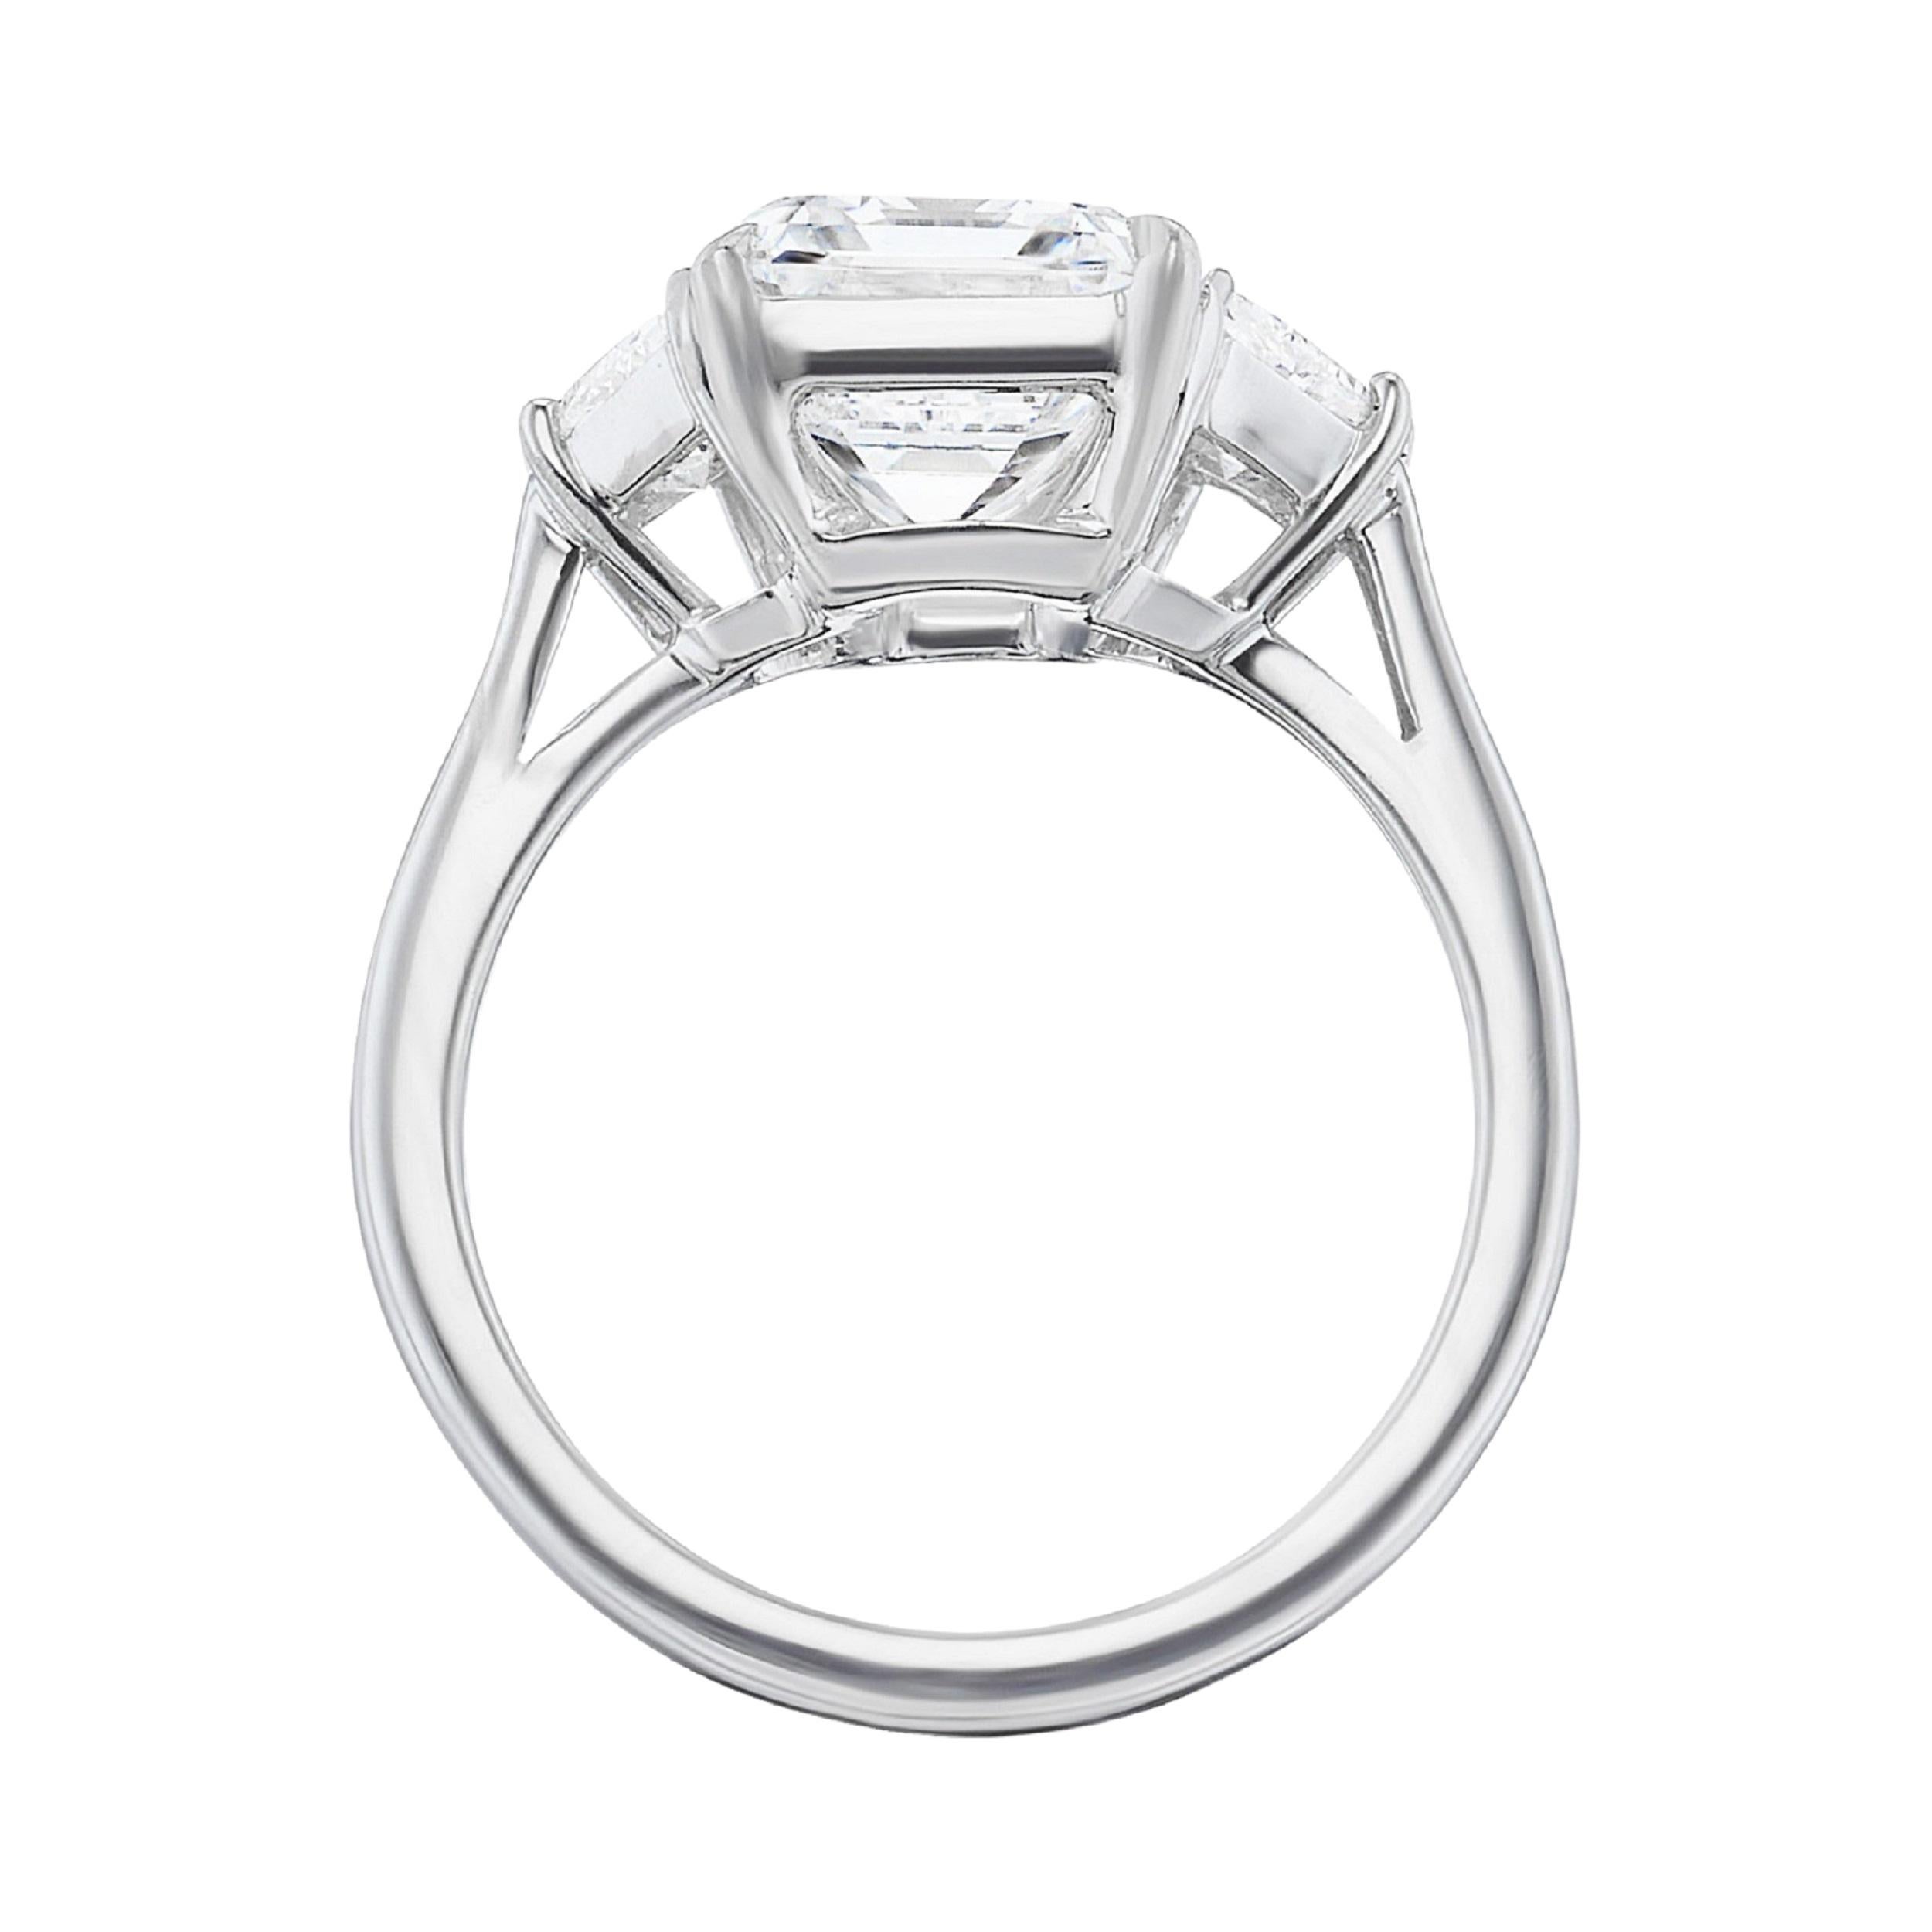 Contemporary GIA Certified 3.01 Carat Three-Stone Emerald Cut Diamond Ring For Sale